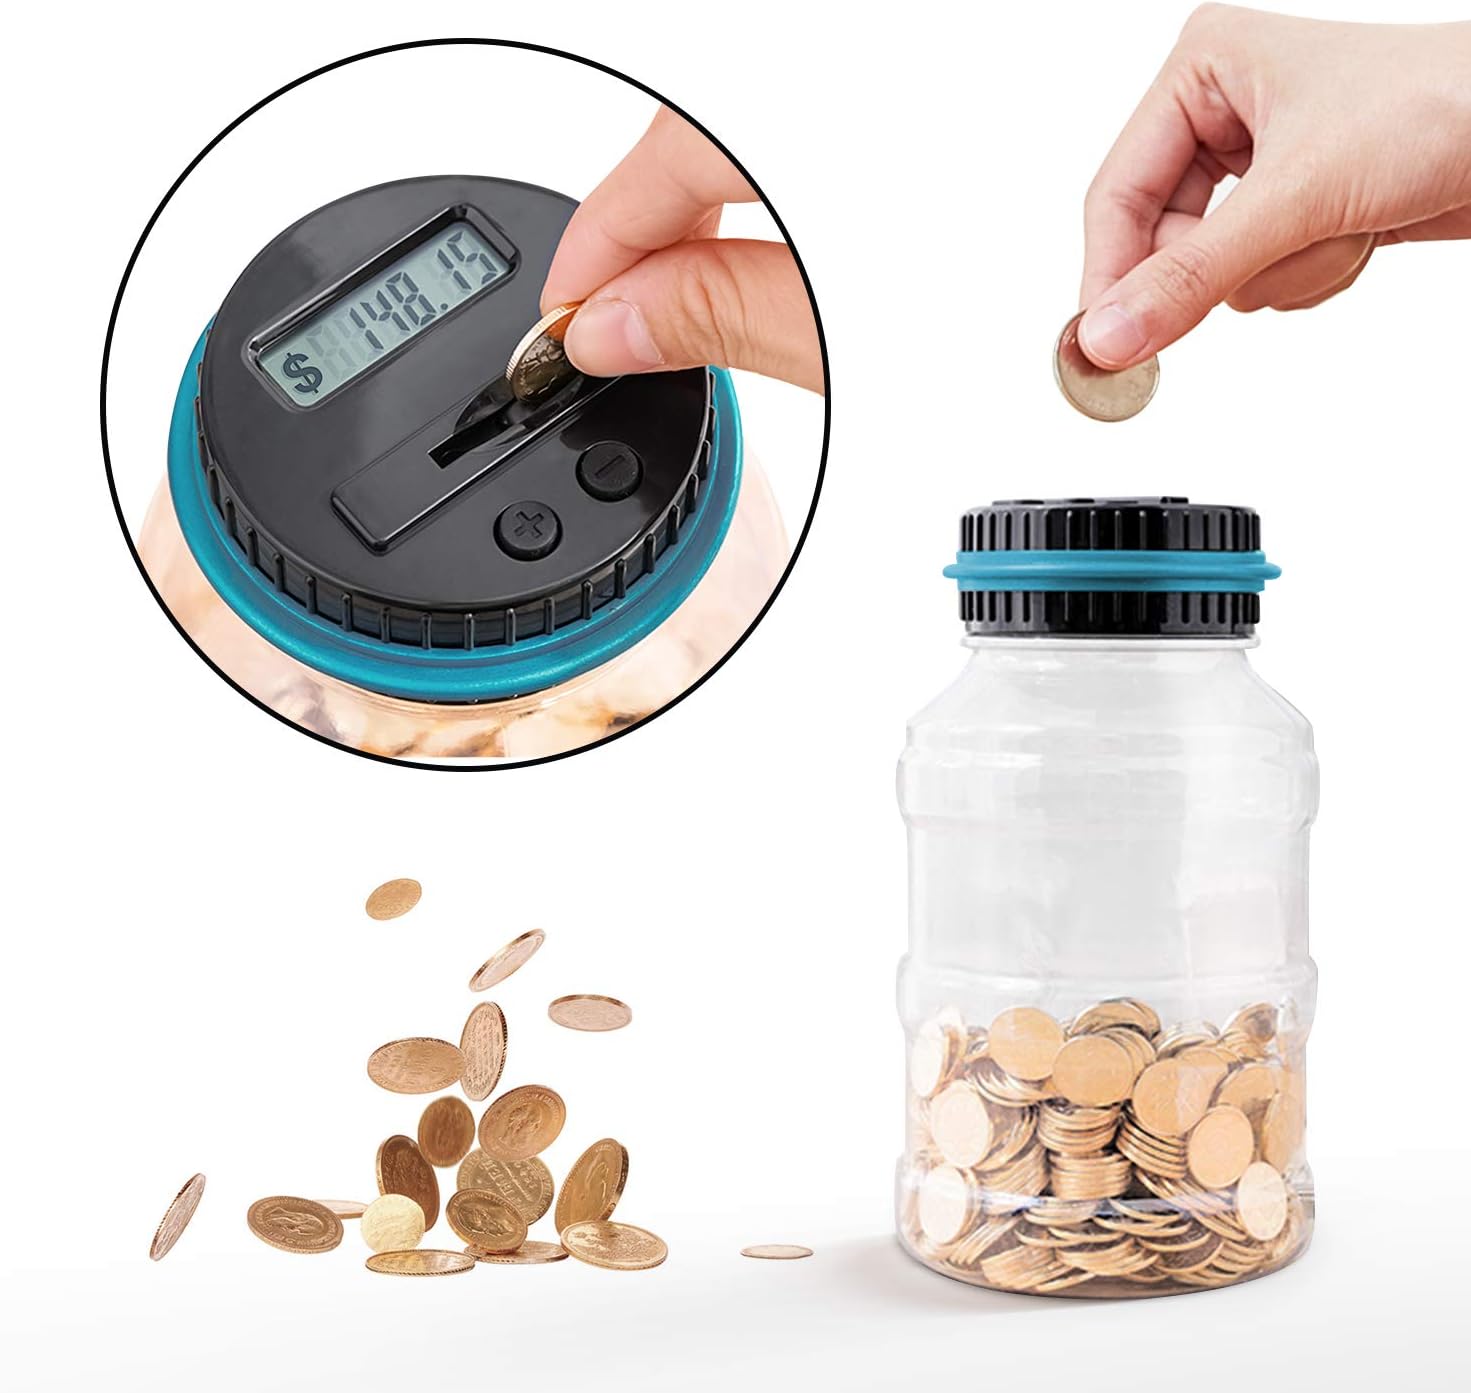 Vcertcpl 1.8L Digital Coin Counting Bank with LCD Counter